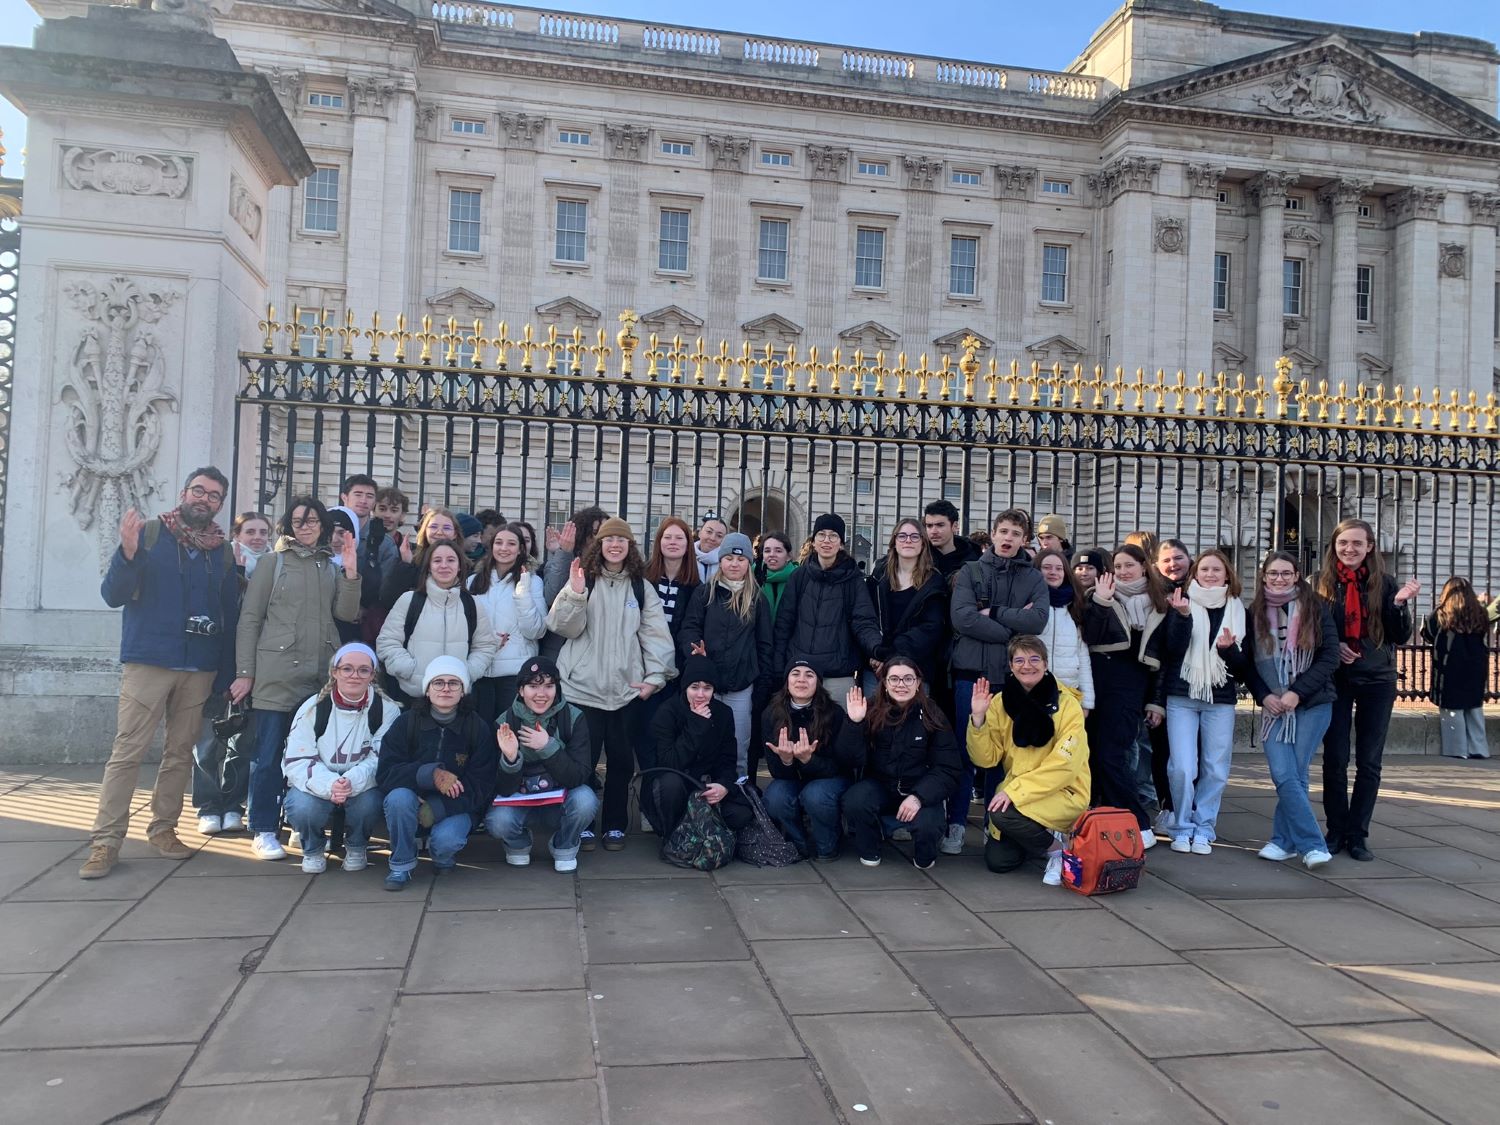 Questumbert.  Students specializing in English from Berthelot High School discover London